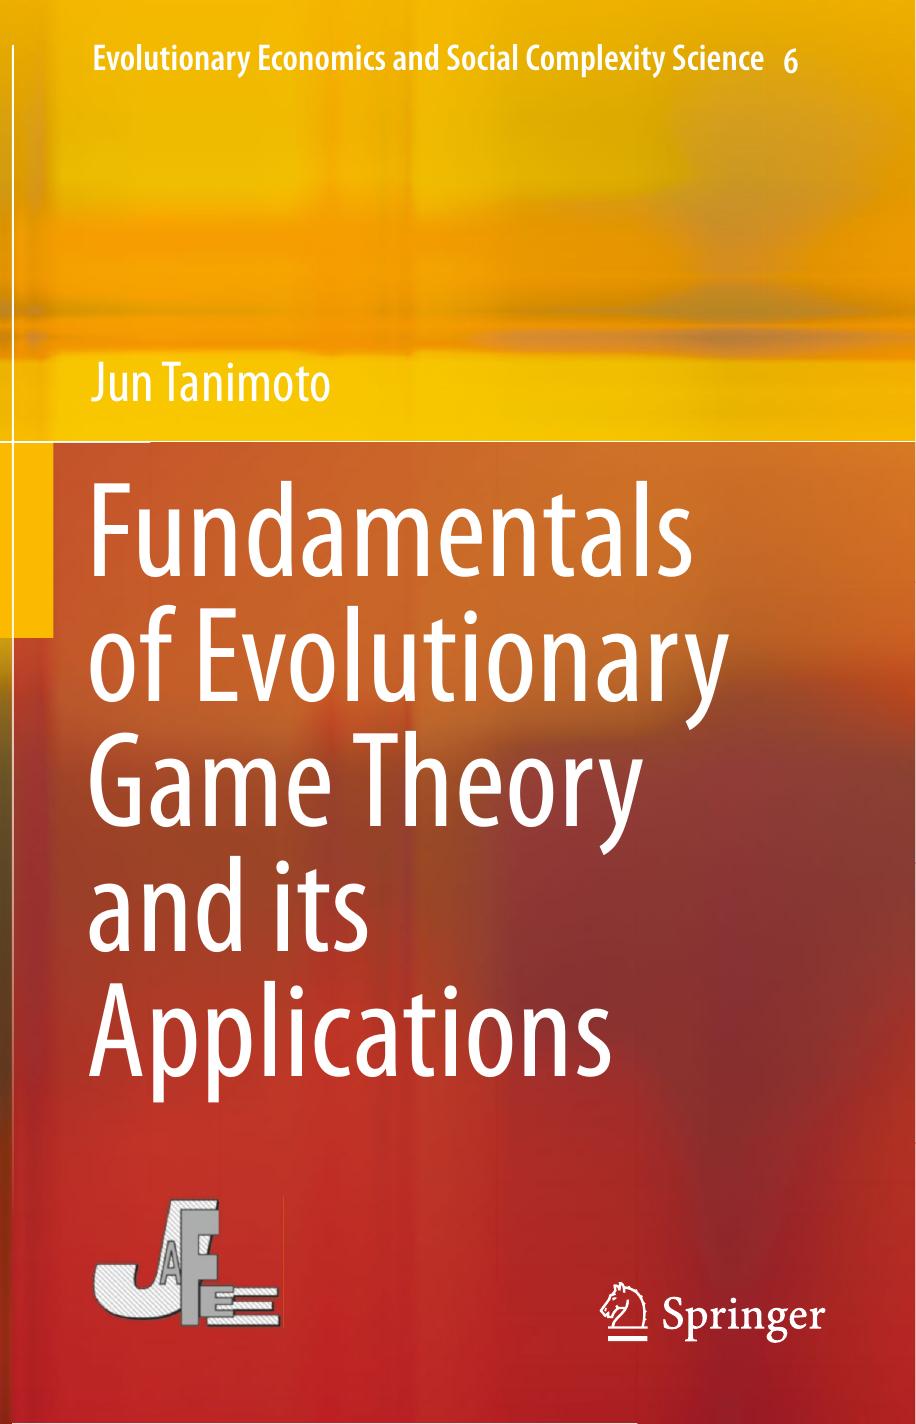 Fundamentals of evolutionary game theory and its applications  Fundamentals of evolutionary game theory and its applications 2015